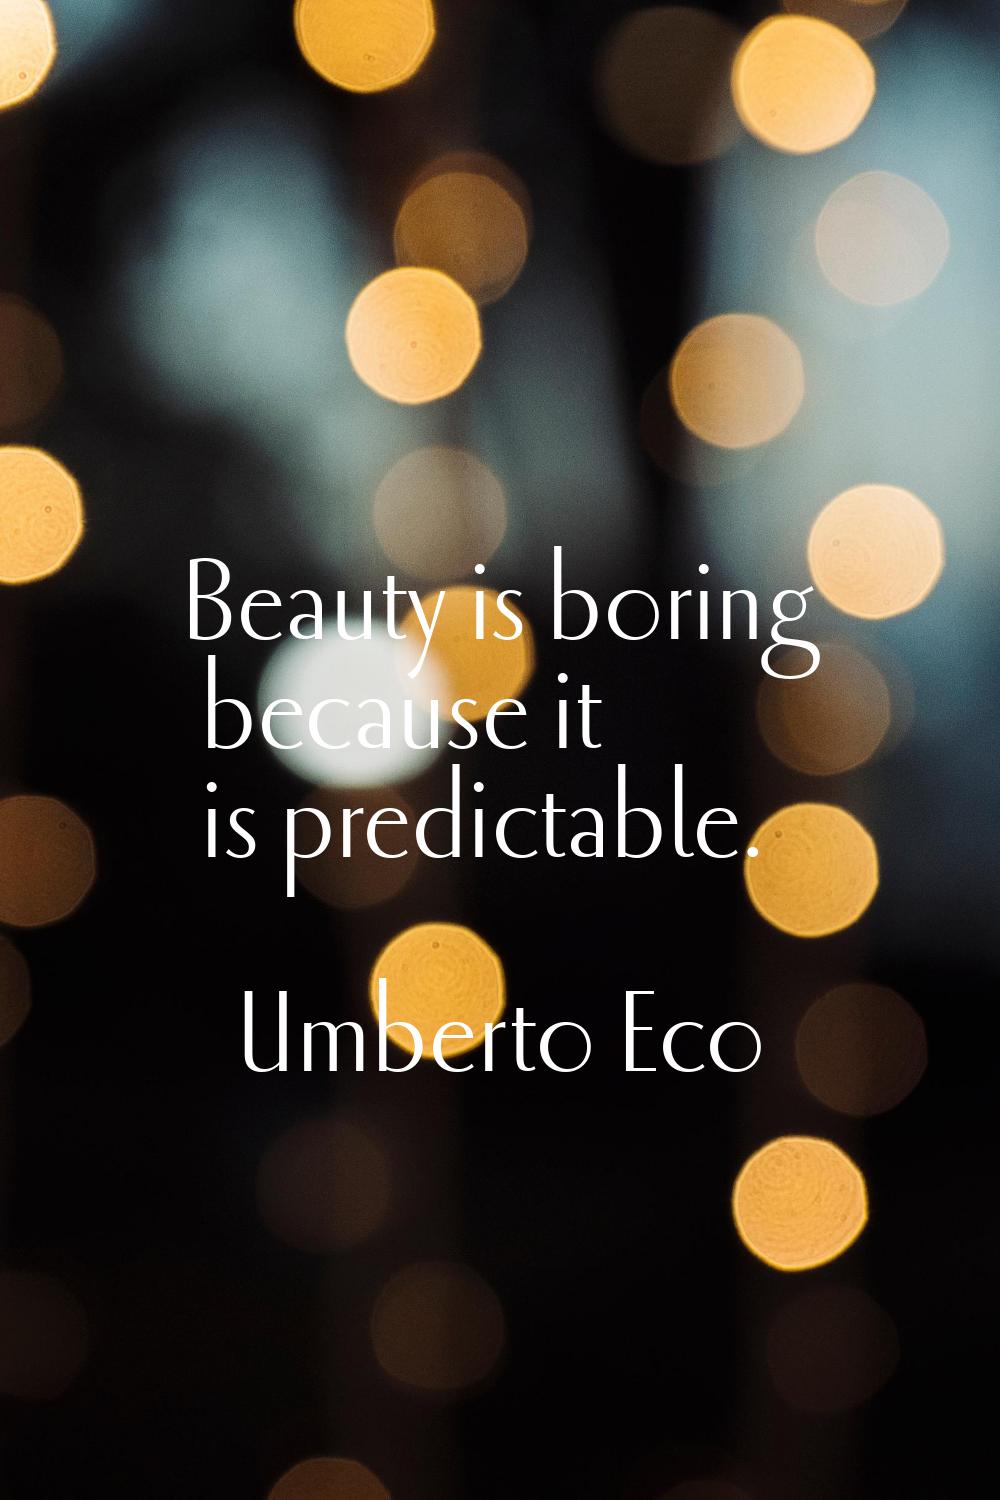 Beauty is boring because it is predictable.